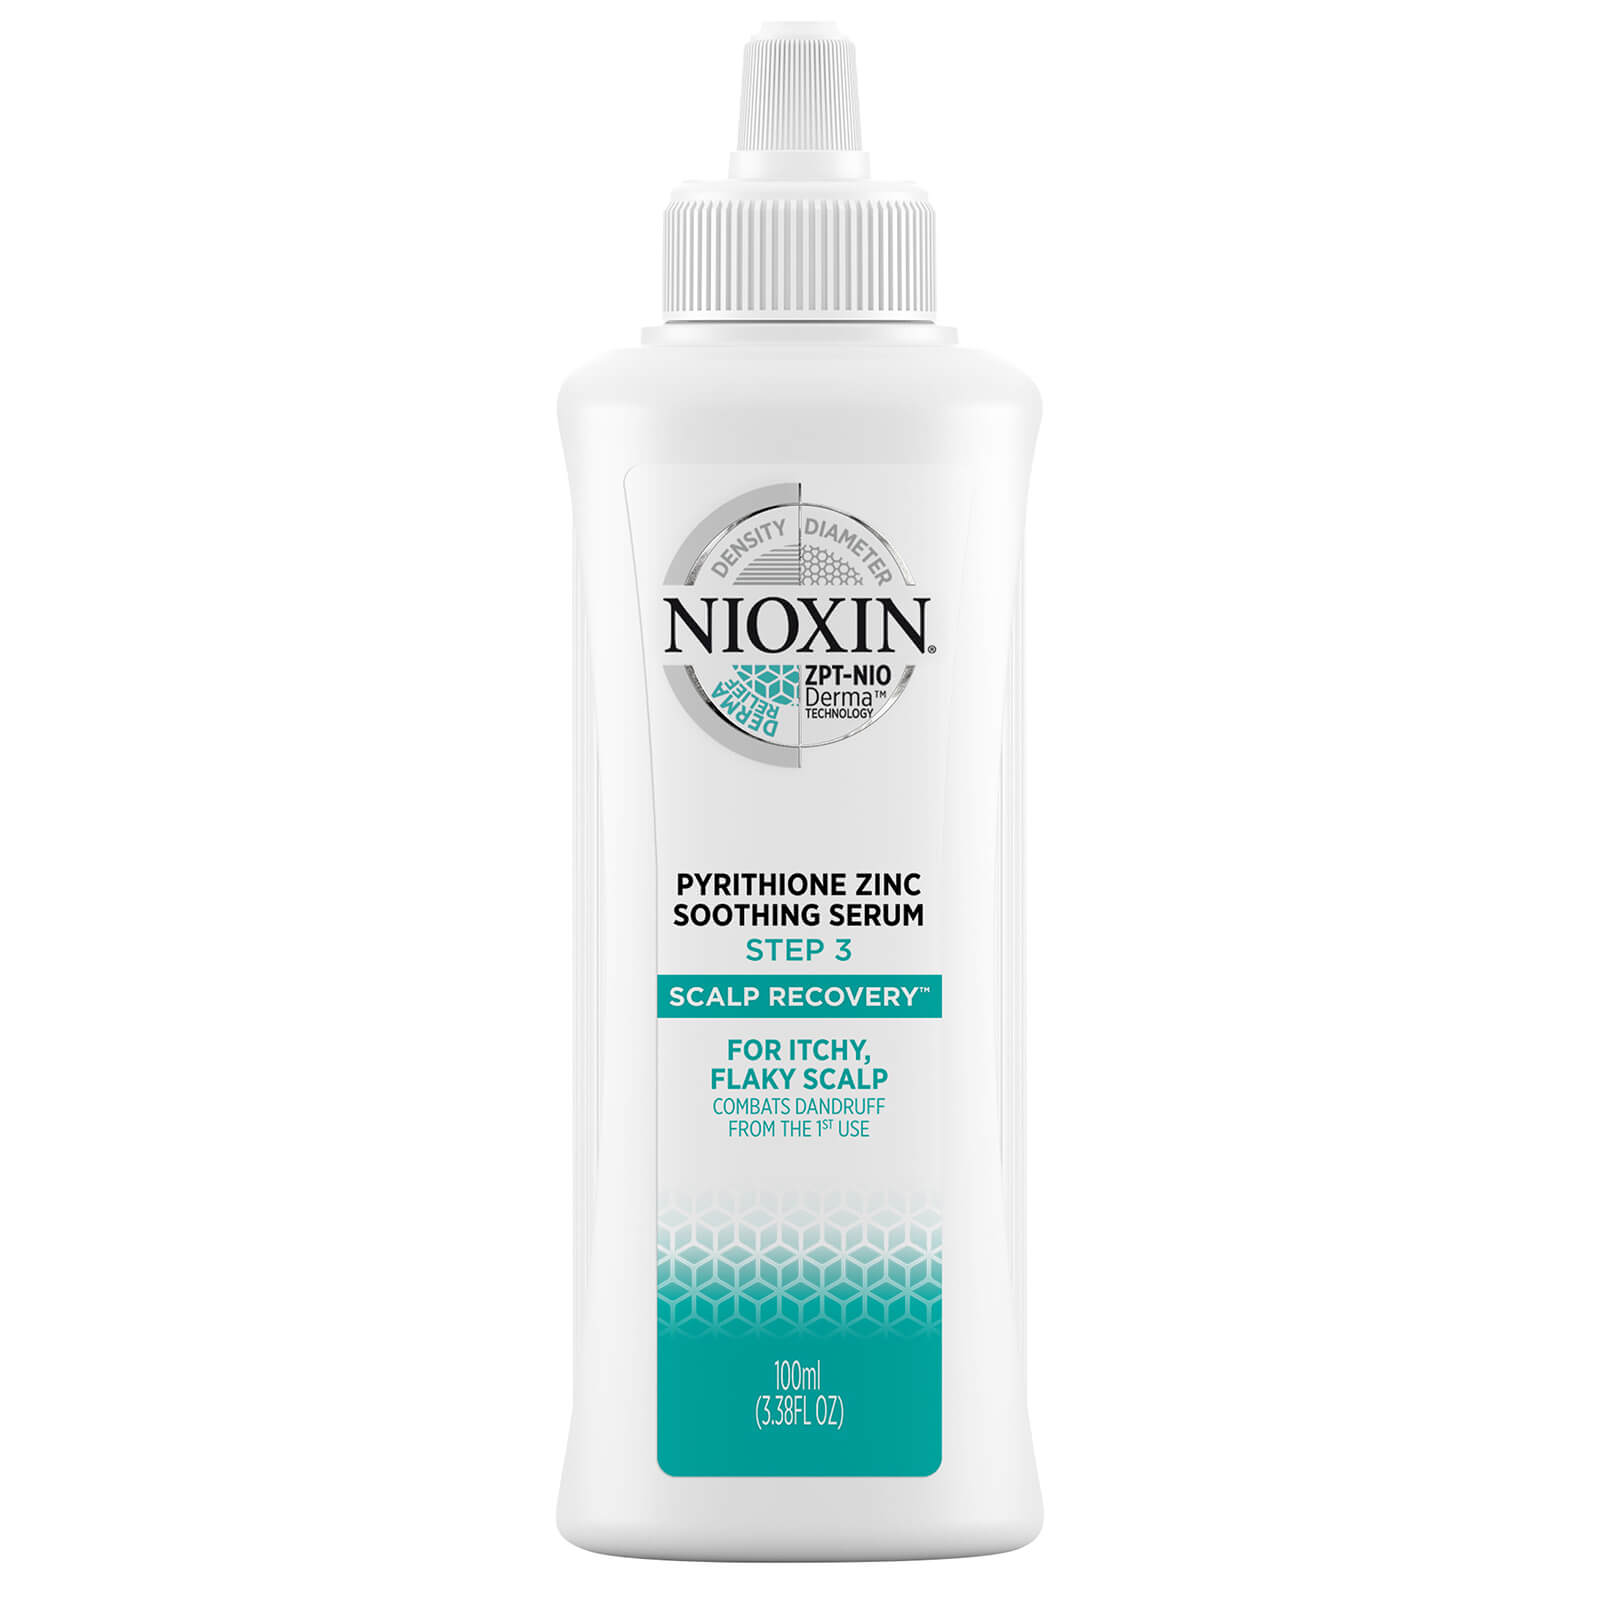 NIOXIN Scalp Recovery Anti-Dandruff Soothing Serum for Itchy, Flaky Scalp 100ml